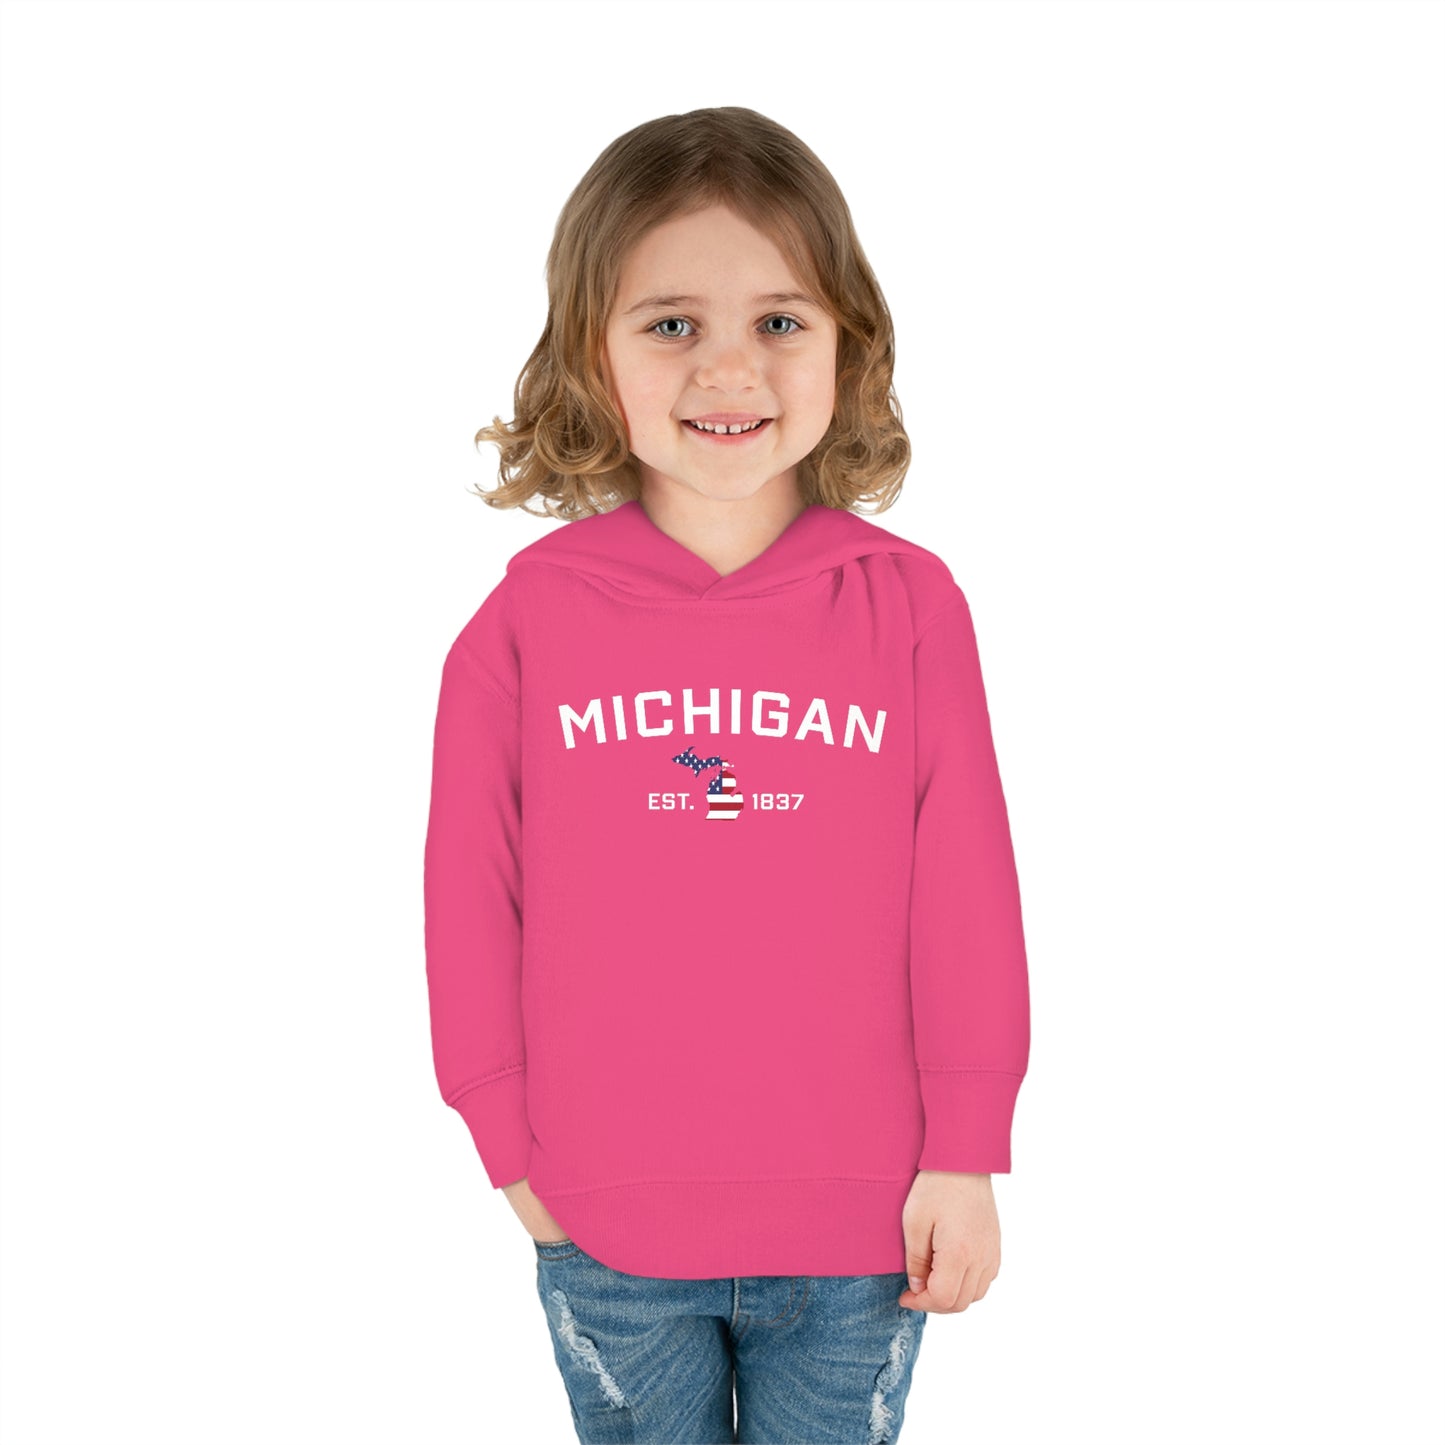 'Michigan EST 1837' Hoodie (With MI USA Flag Outline) | Unisex Toddler